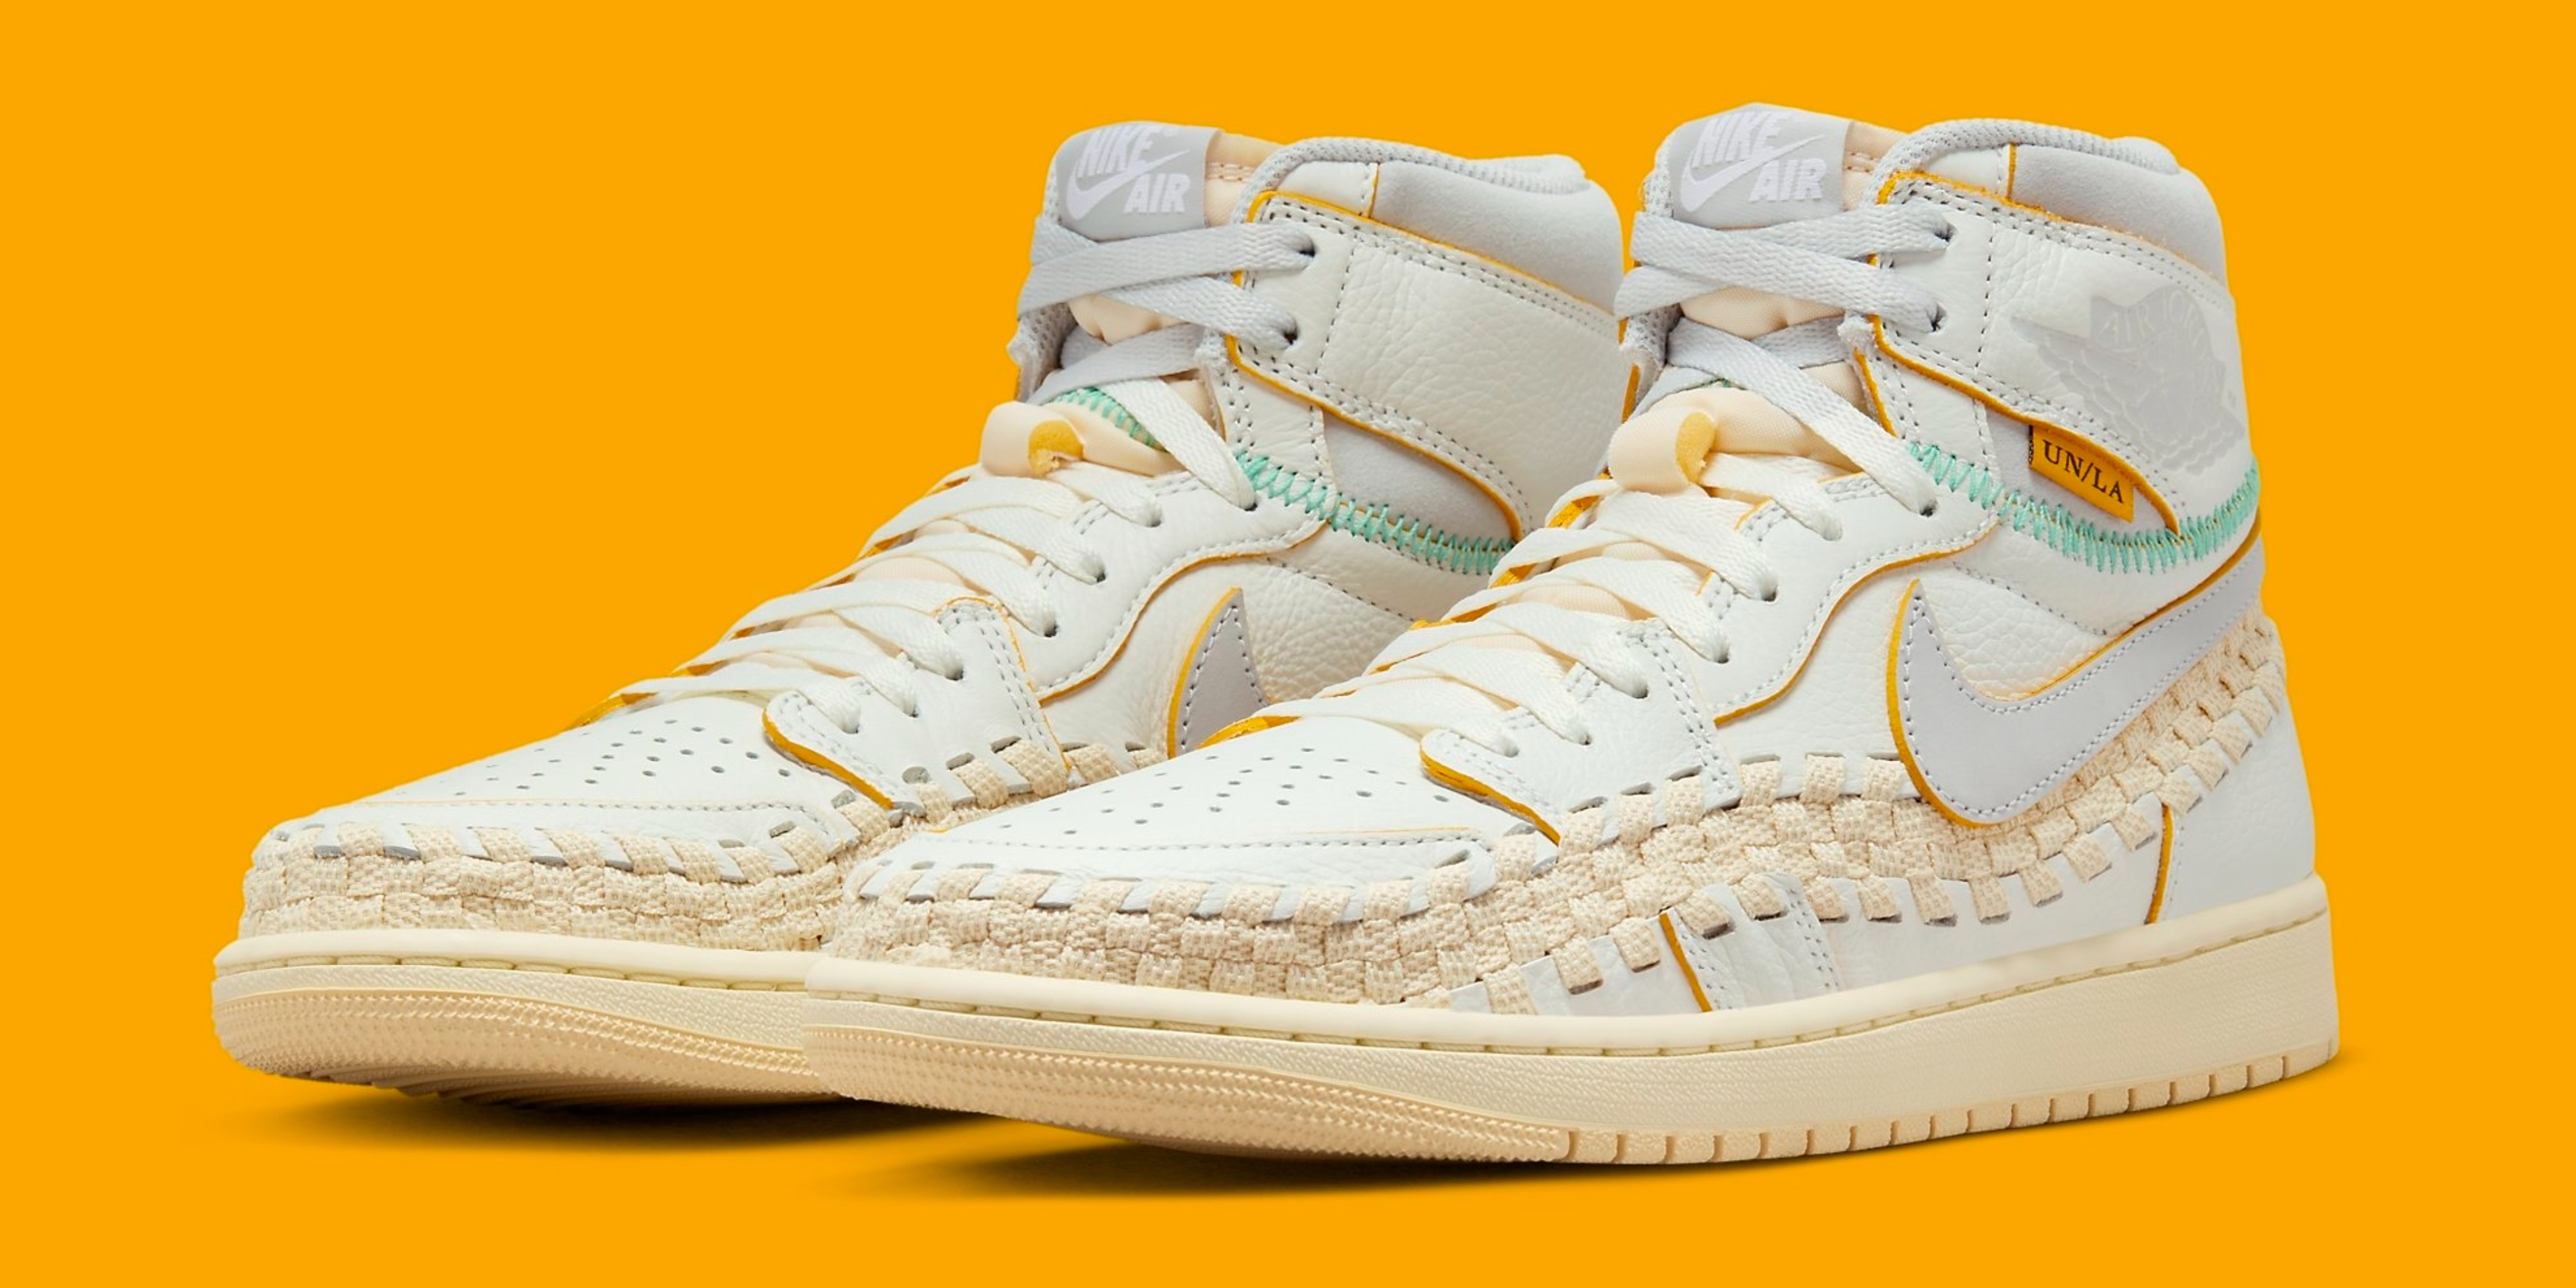 Union x Bephies Beauty Supply x Air Jordan 1 Woven Collab Release 